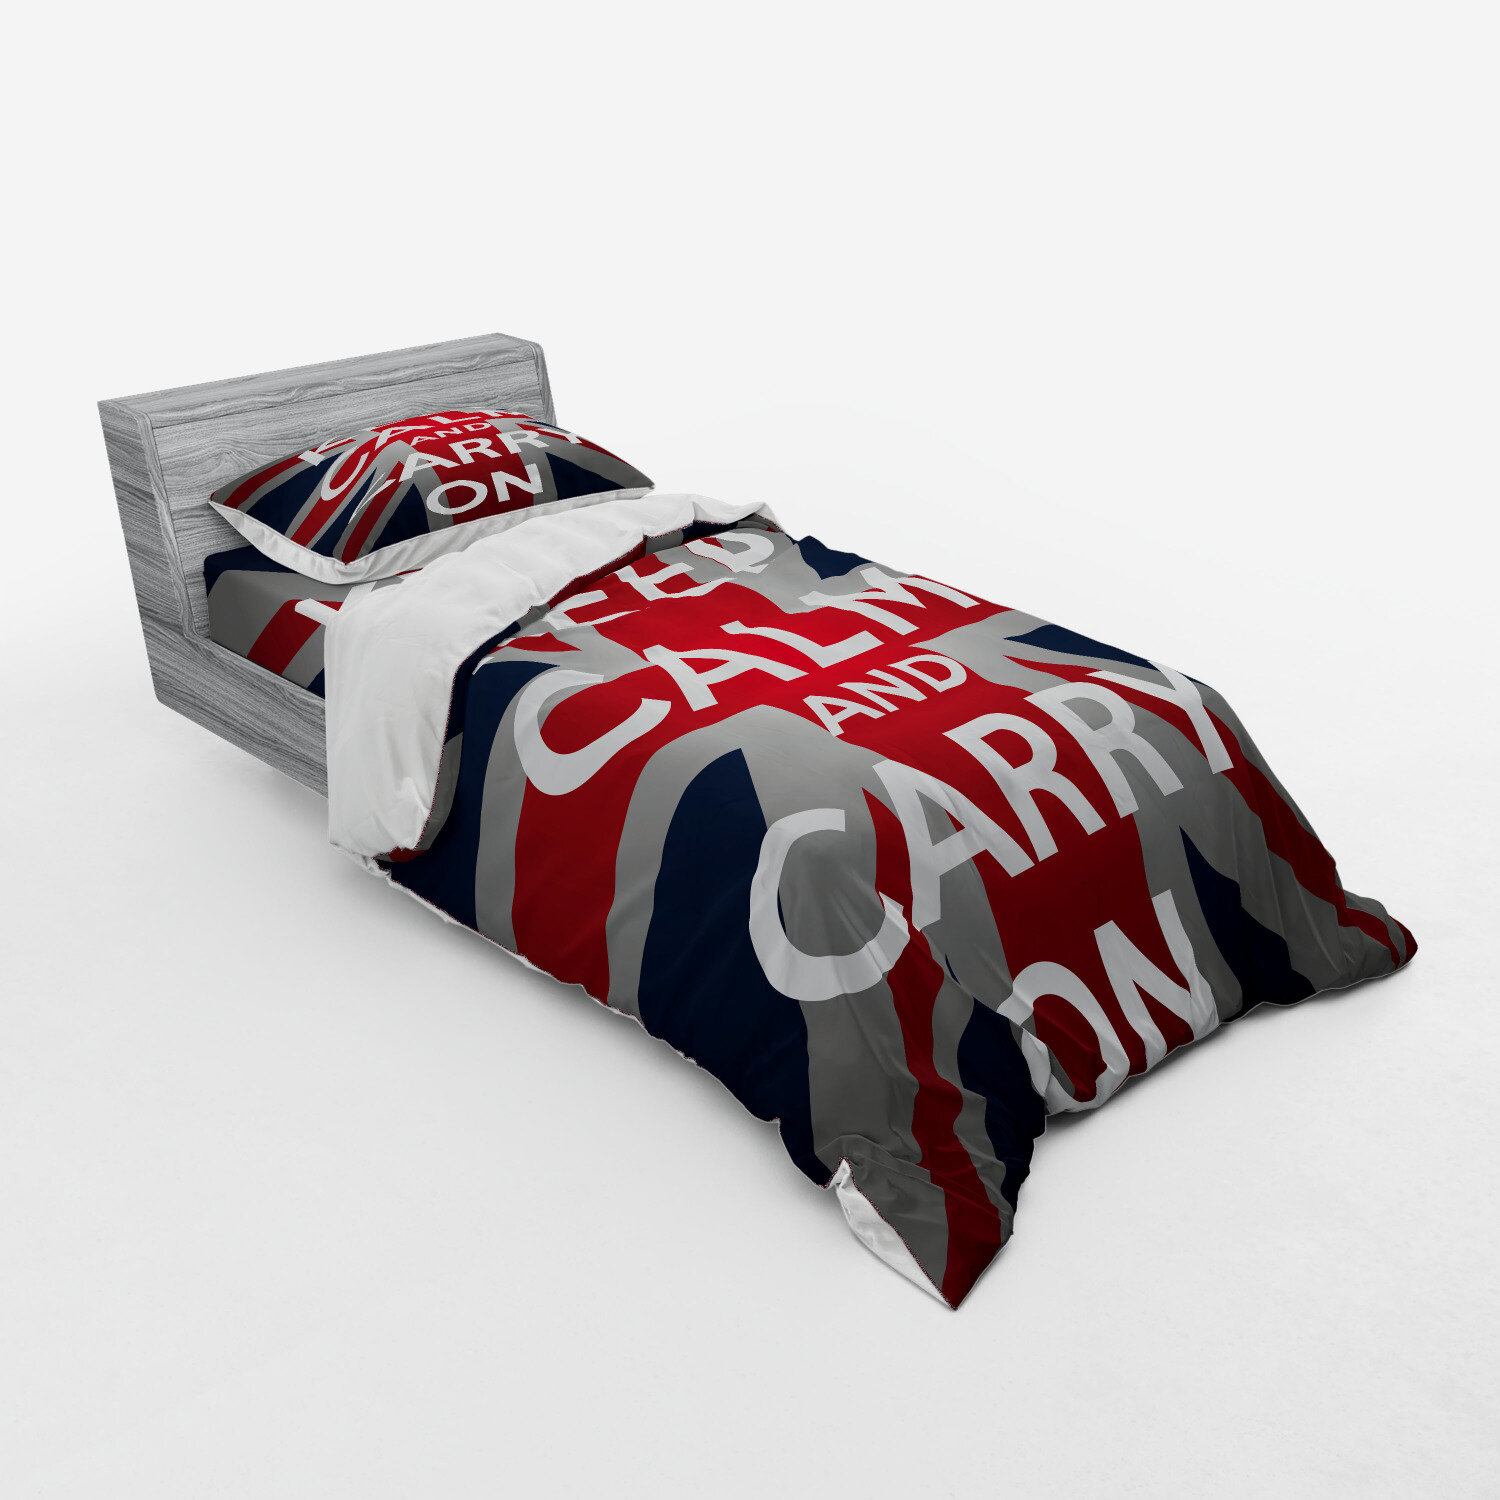 East Urban Home Union Jack Keep Calm And Cary On Words Crown